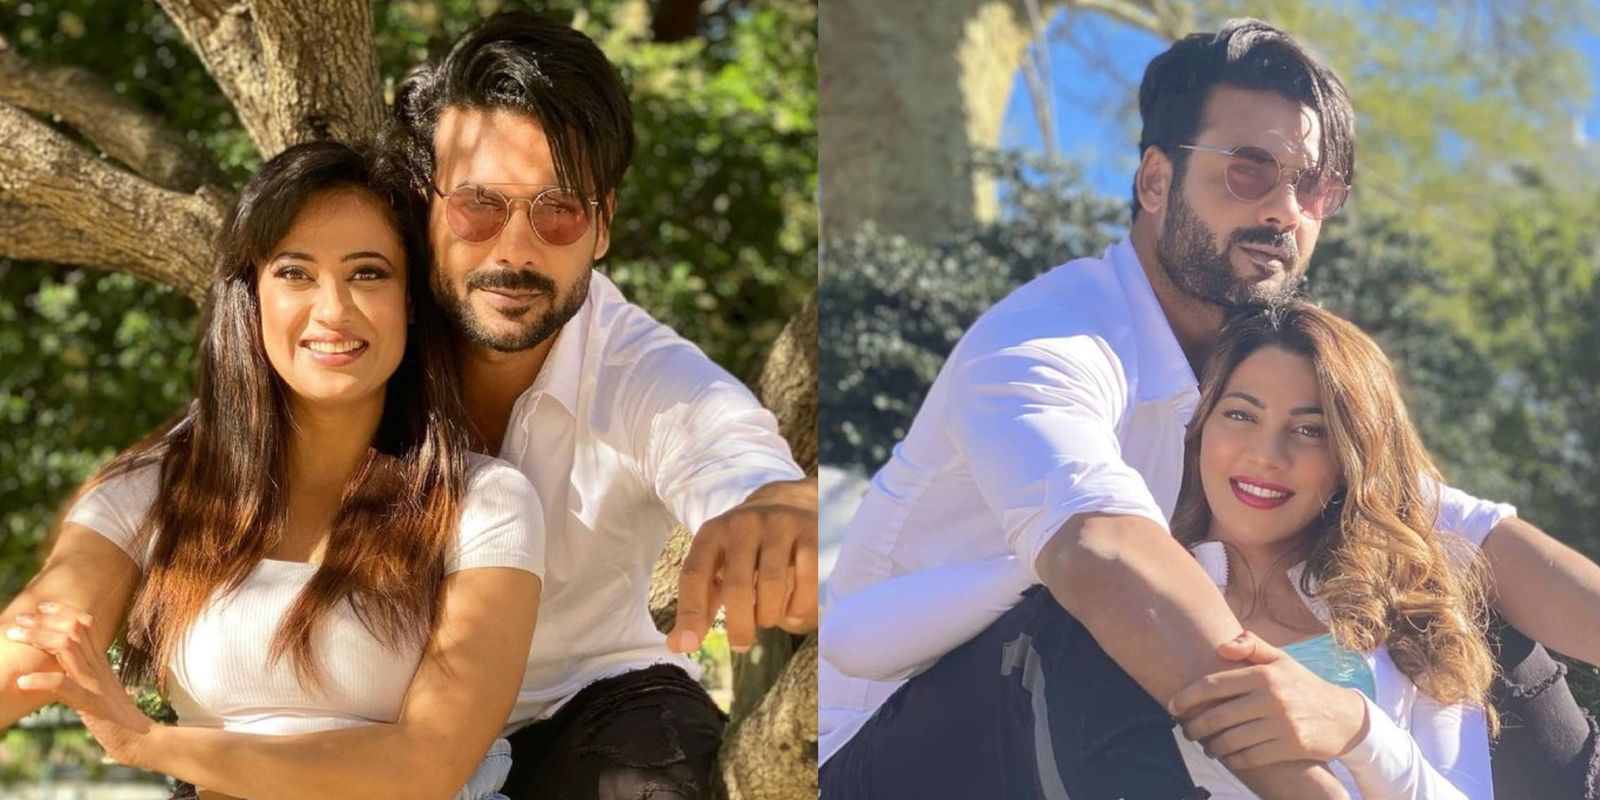 Khatron Ke Khiladi 11: Vishal Aditya Singh Poses With Shweta And Nikki For Pictures; Is He Still In The Game?